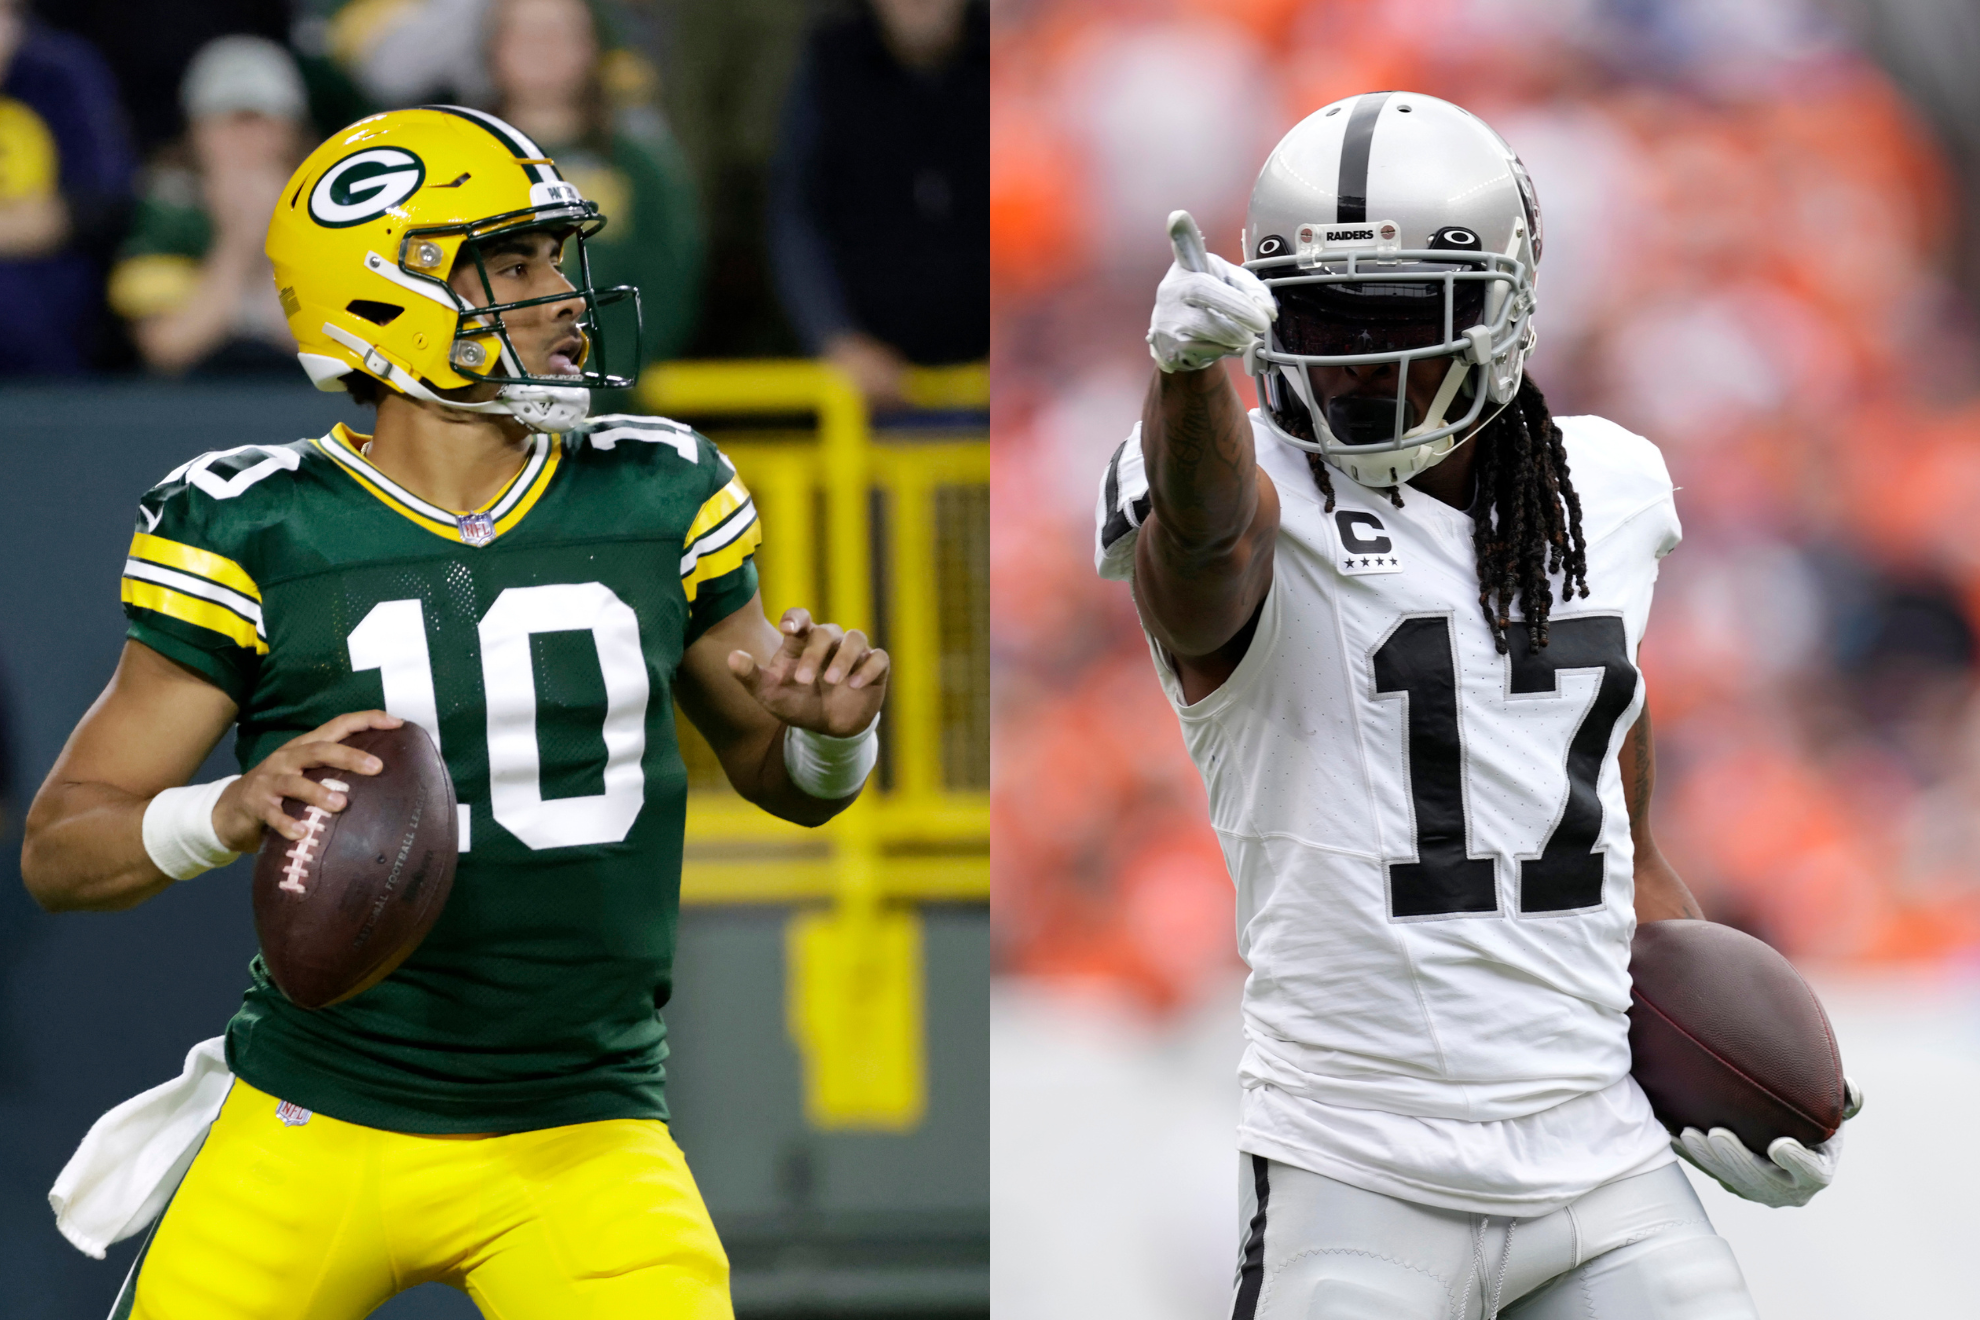 Will Davante Adams (right) and the Raiders get one over on Jordan Love (left) and the Packers?